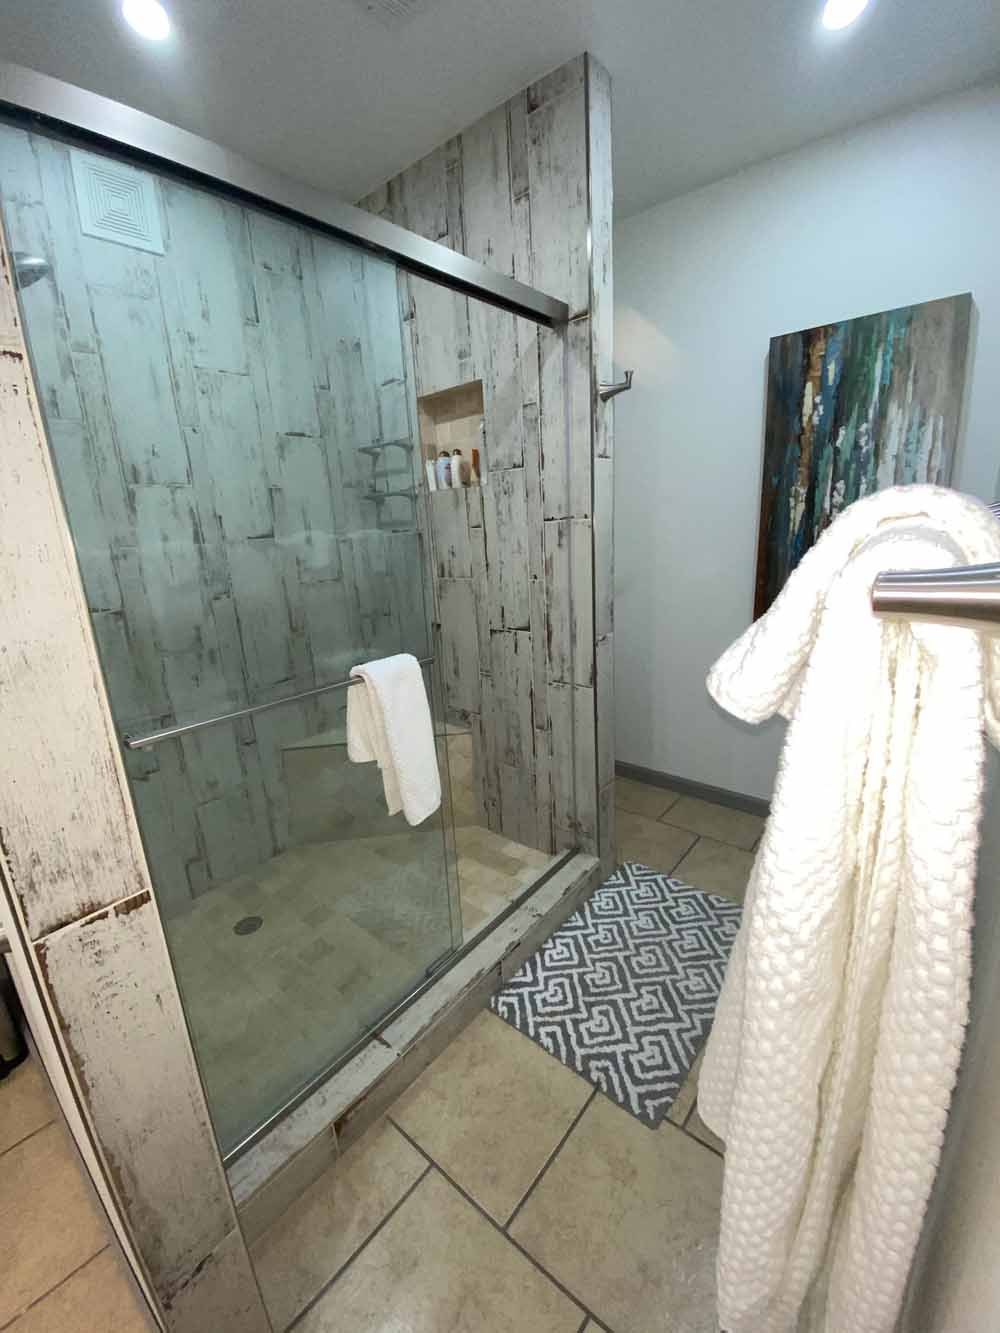 Image of Hilltop Storage Solutions apartment/accomodation area at their Northlake, TX location showing a view of the bathroom and shower area.